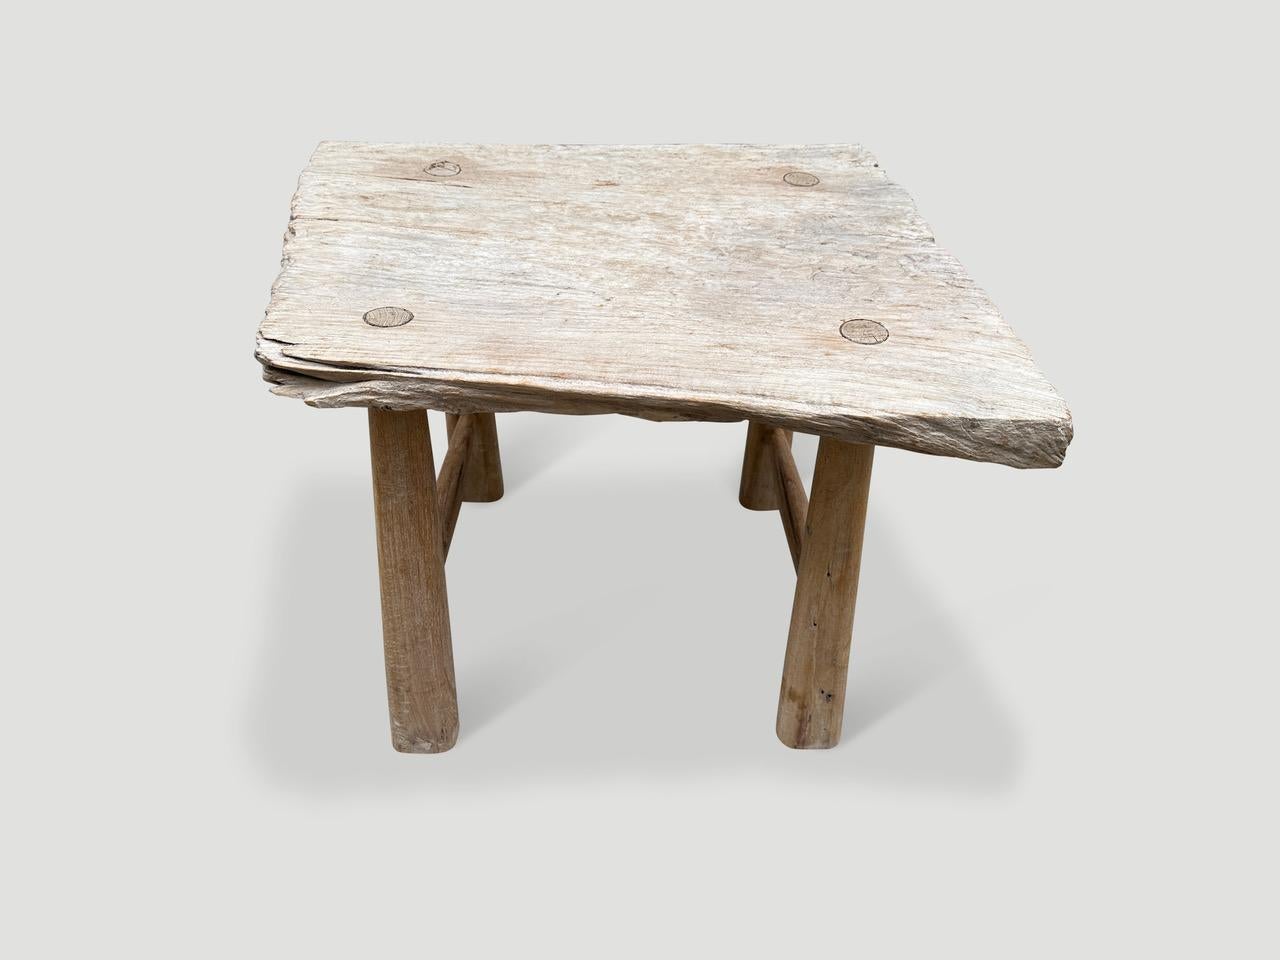 Andrianna Shamaris Bleached Teak Wood Stool or Side Table In Excellent Condition For Sale In New York, NY